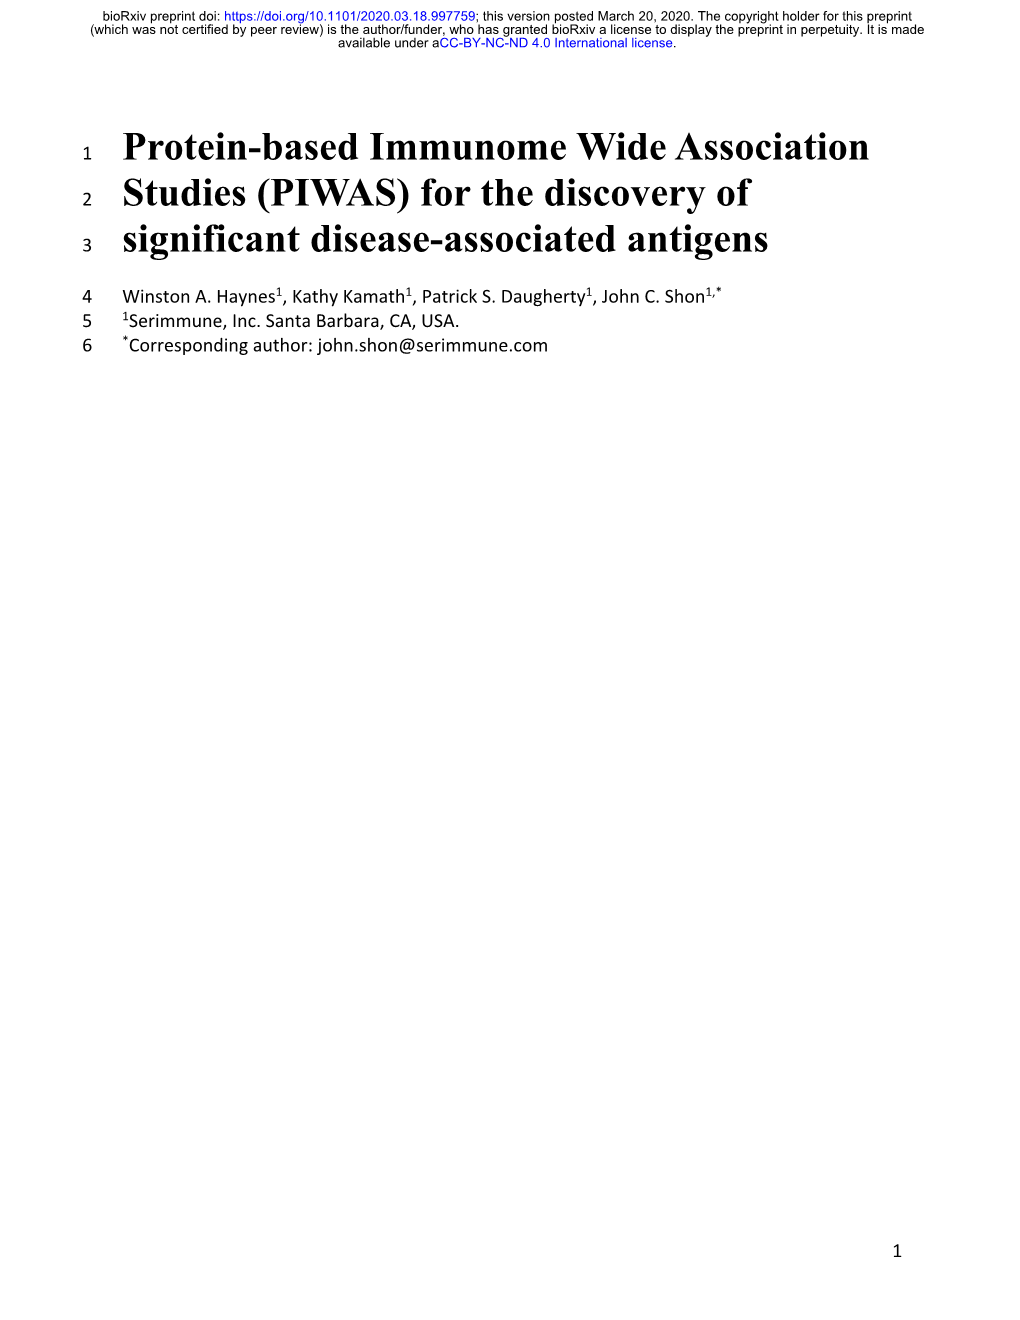 Protein-Based Immunome Wide Association Studies (PIWAS) for the Discovery of Significant Disease-Associated Antigens